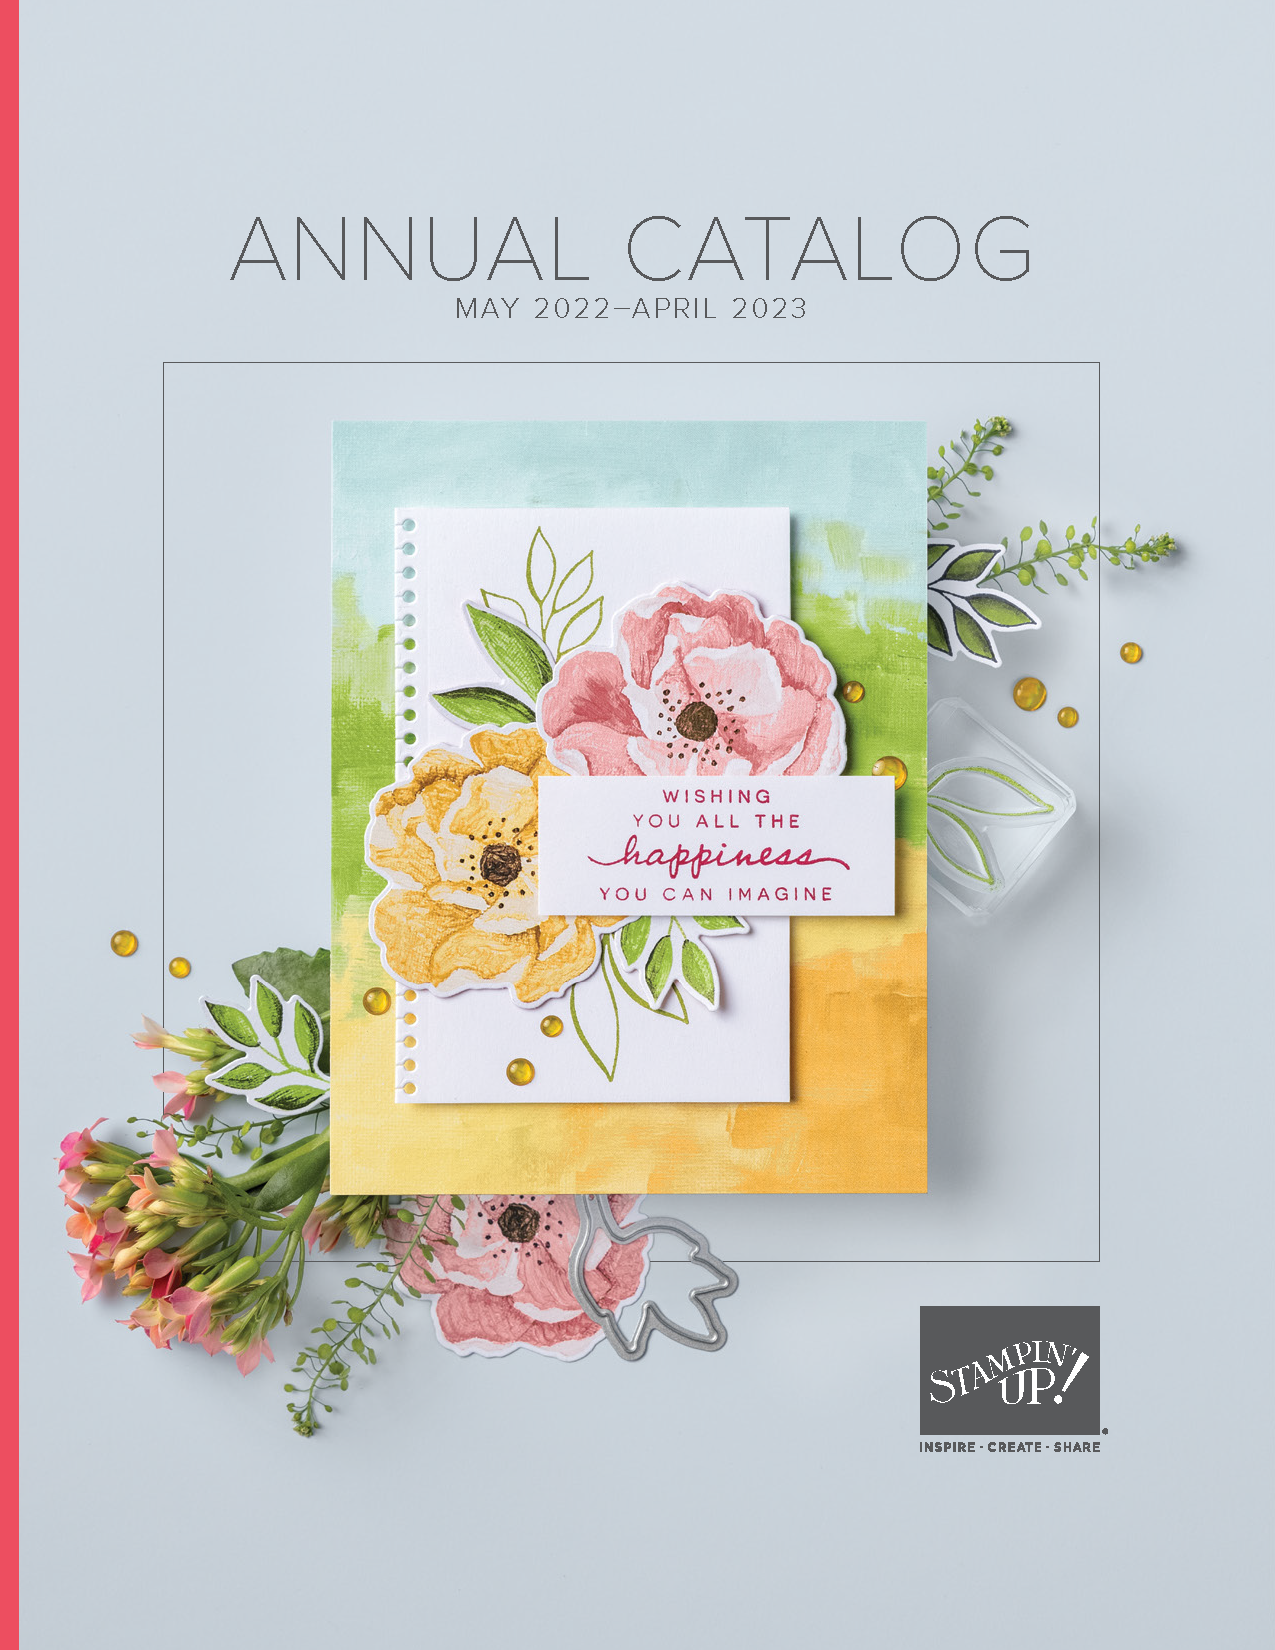 Stampin' Up! 2022-23 Annual Catalog